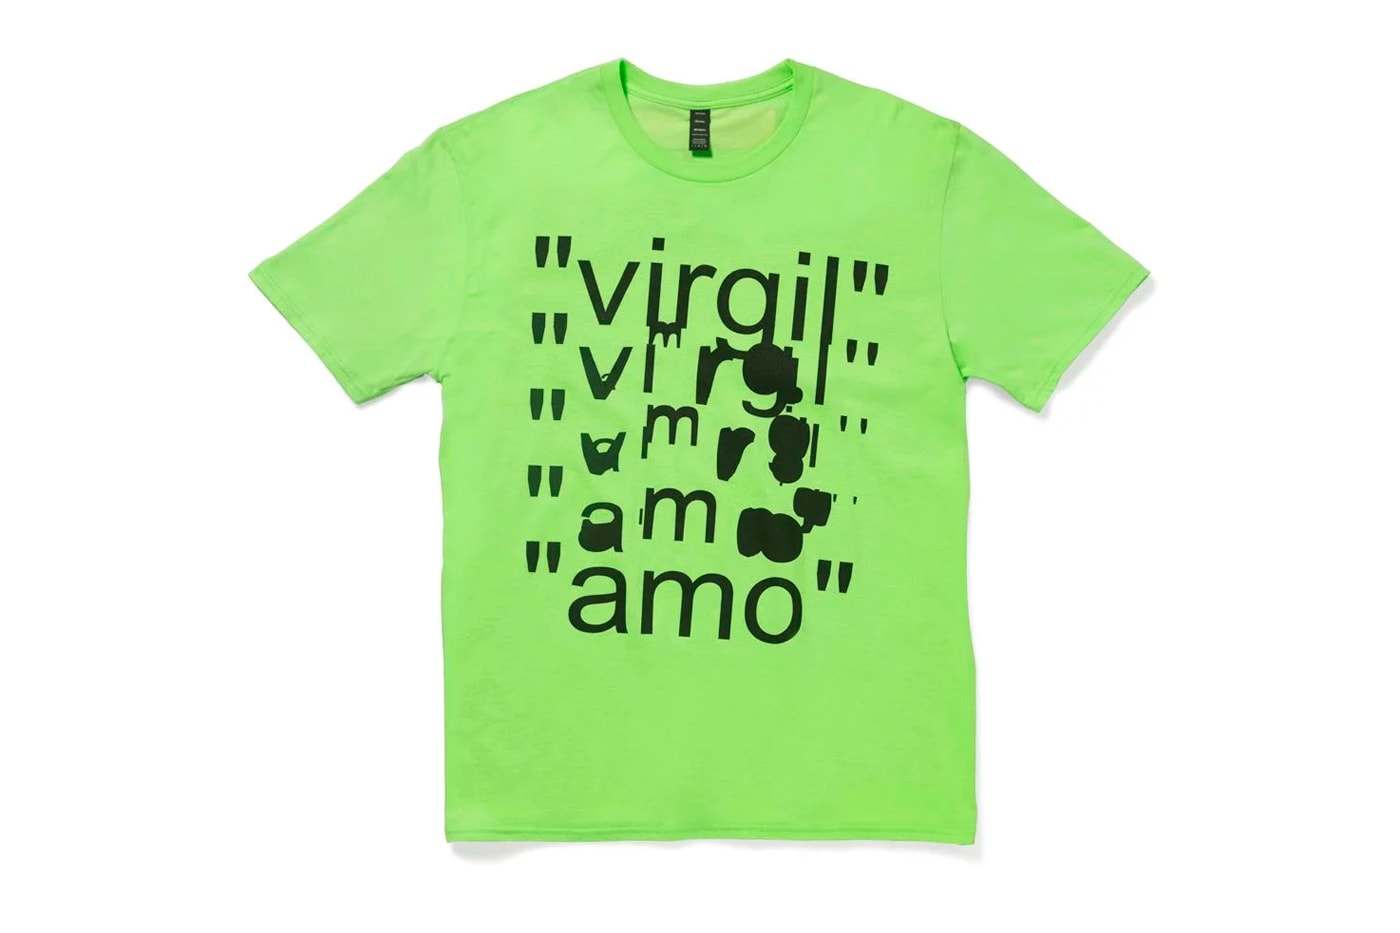 MCA Chicago Virgil Abloh Neon-Colored Apparel off white pyrex figures of speech exhibition hats t-shirts price drop info 